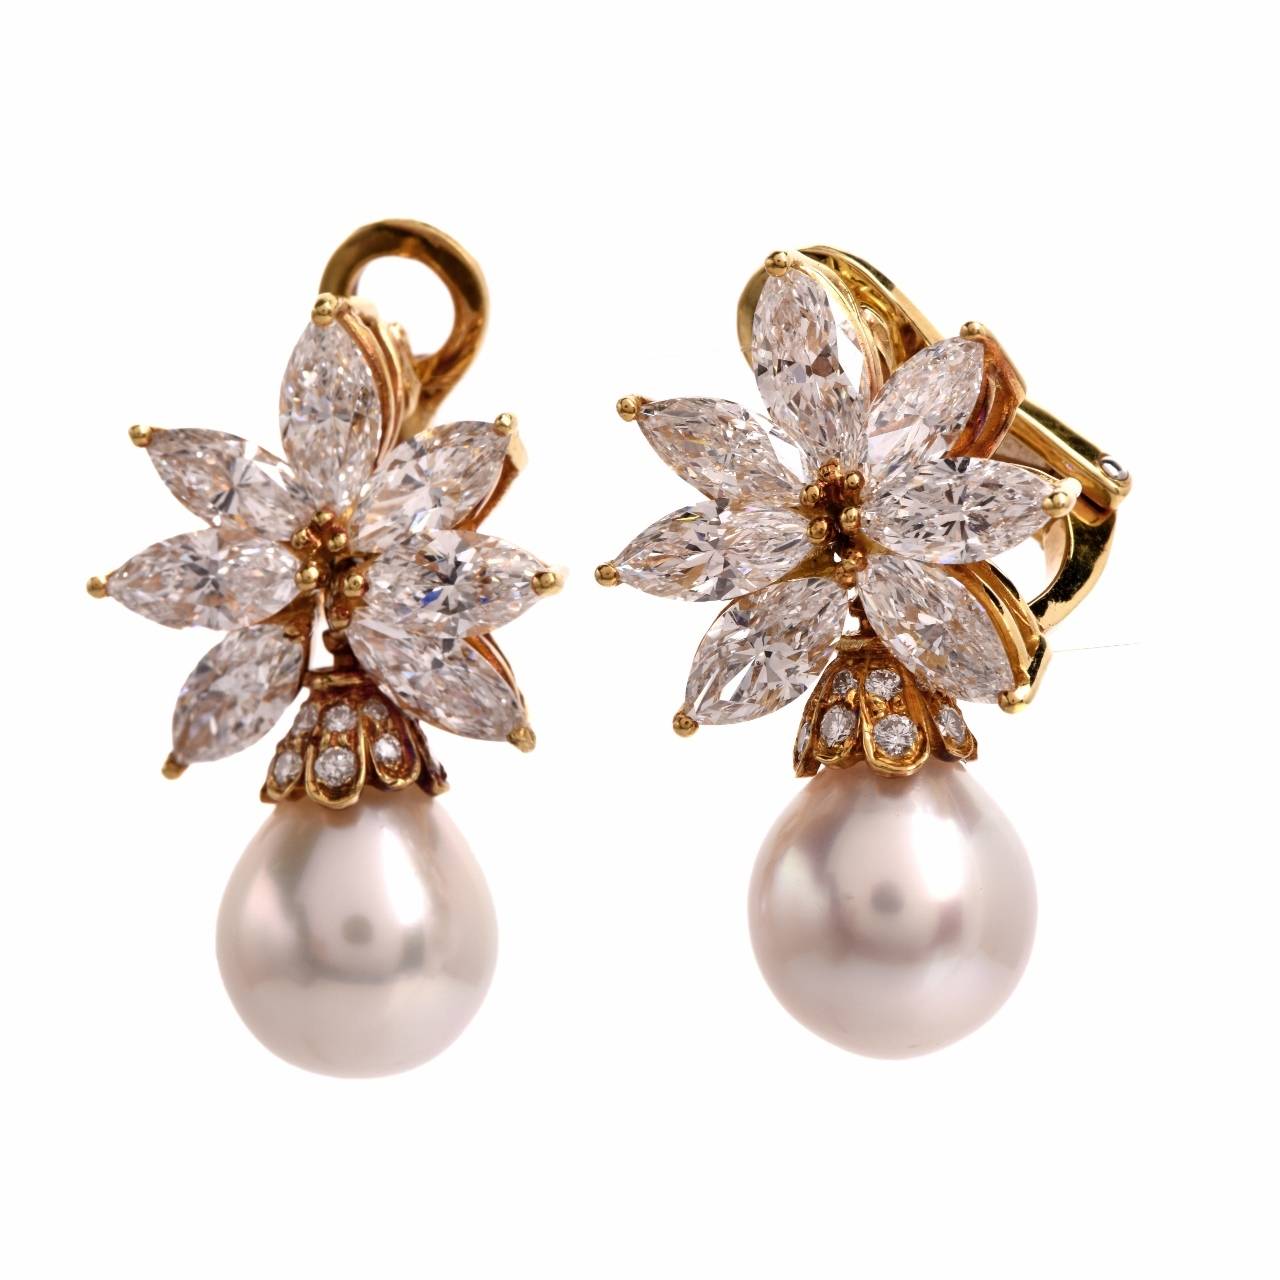 These allurifng estate earrings are crafted in solid 18K yellow gold  and weigh approx. 15.9  grams. In  distinctly impressive design, these  estate earrings expose a pair of  lustrous 10 mm cultured pearls, of 'white with pinkish-cream hue' color, 